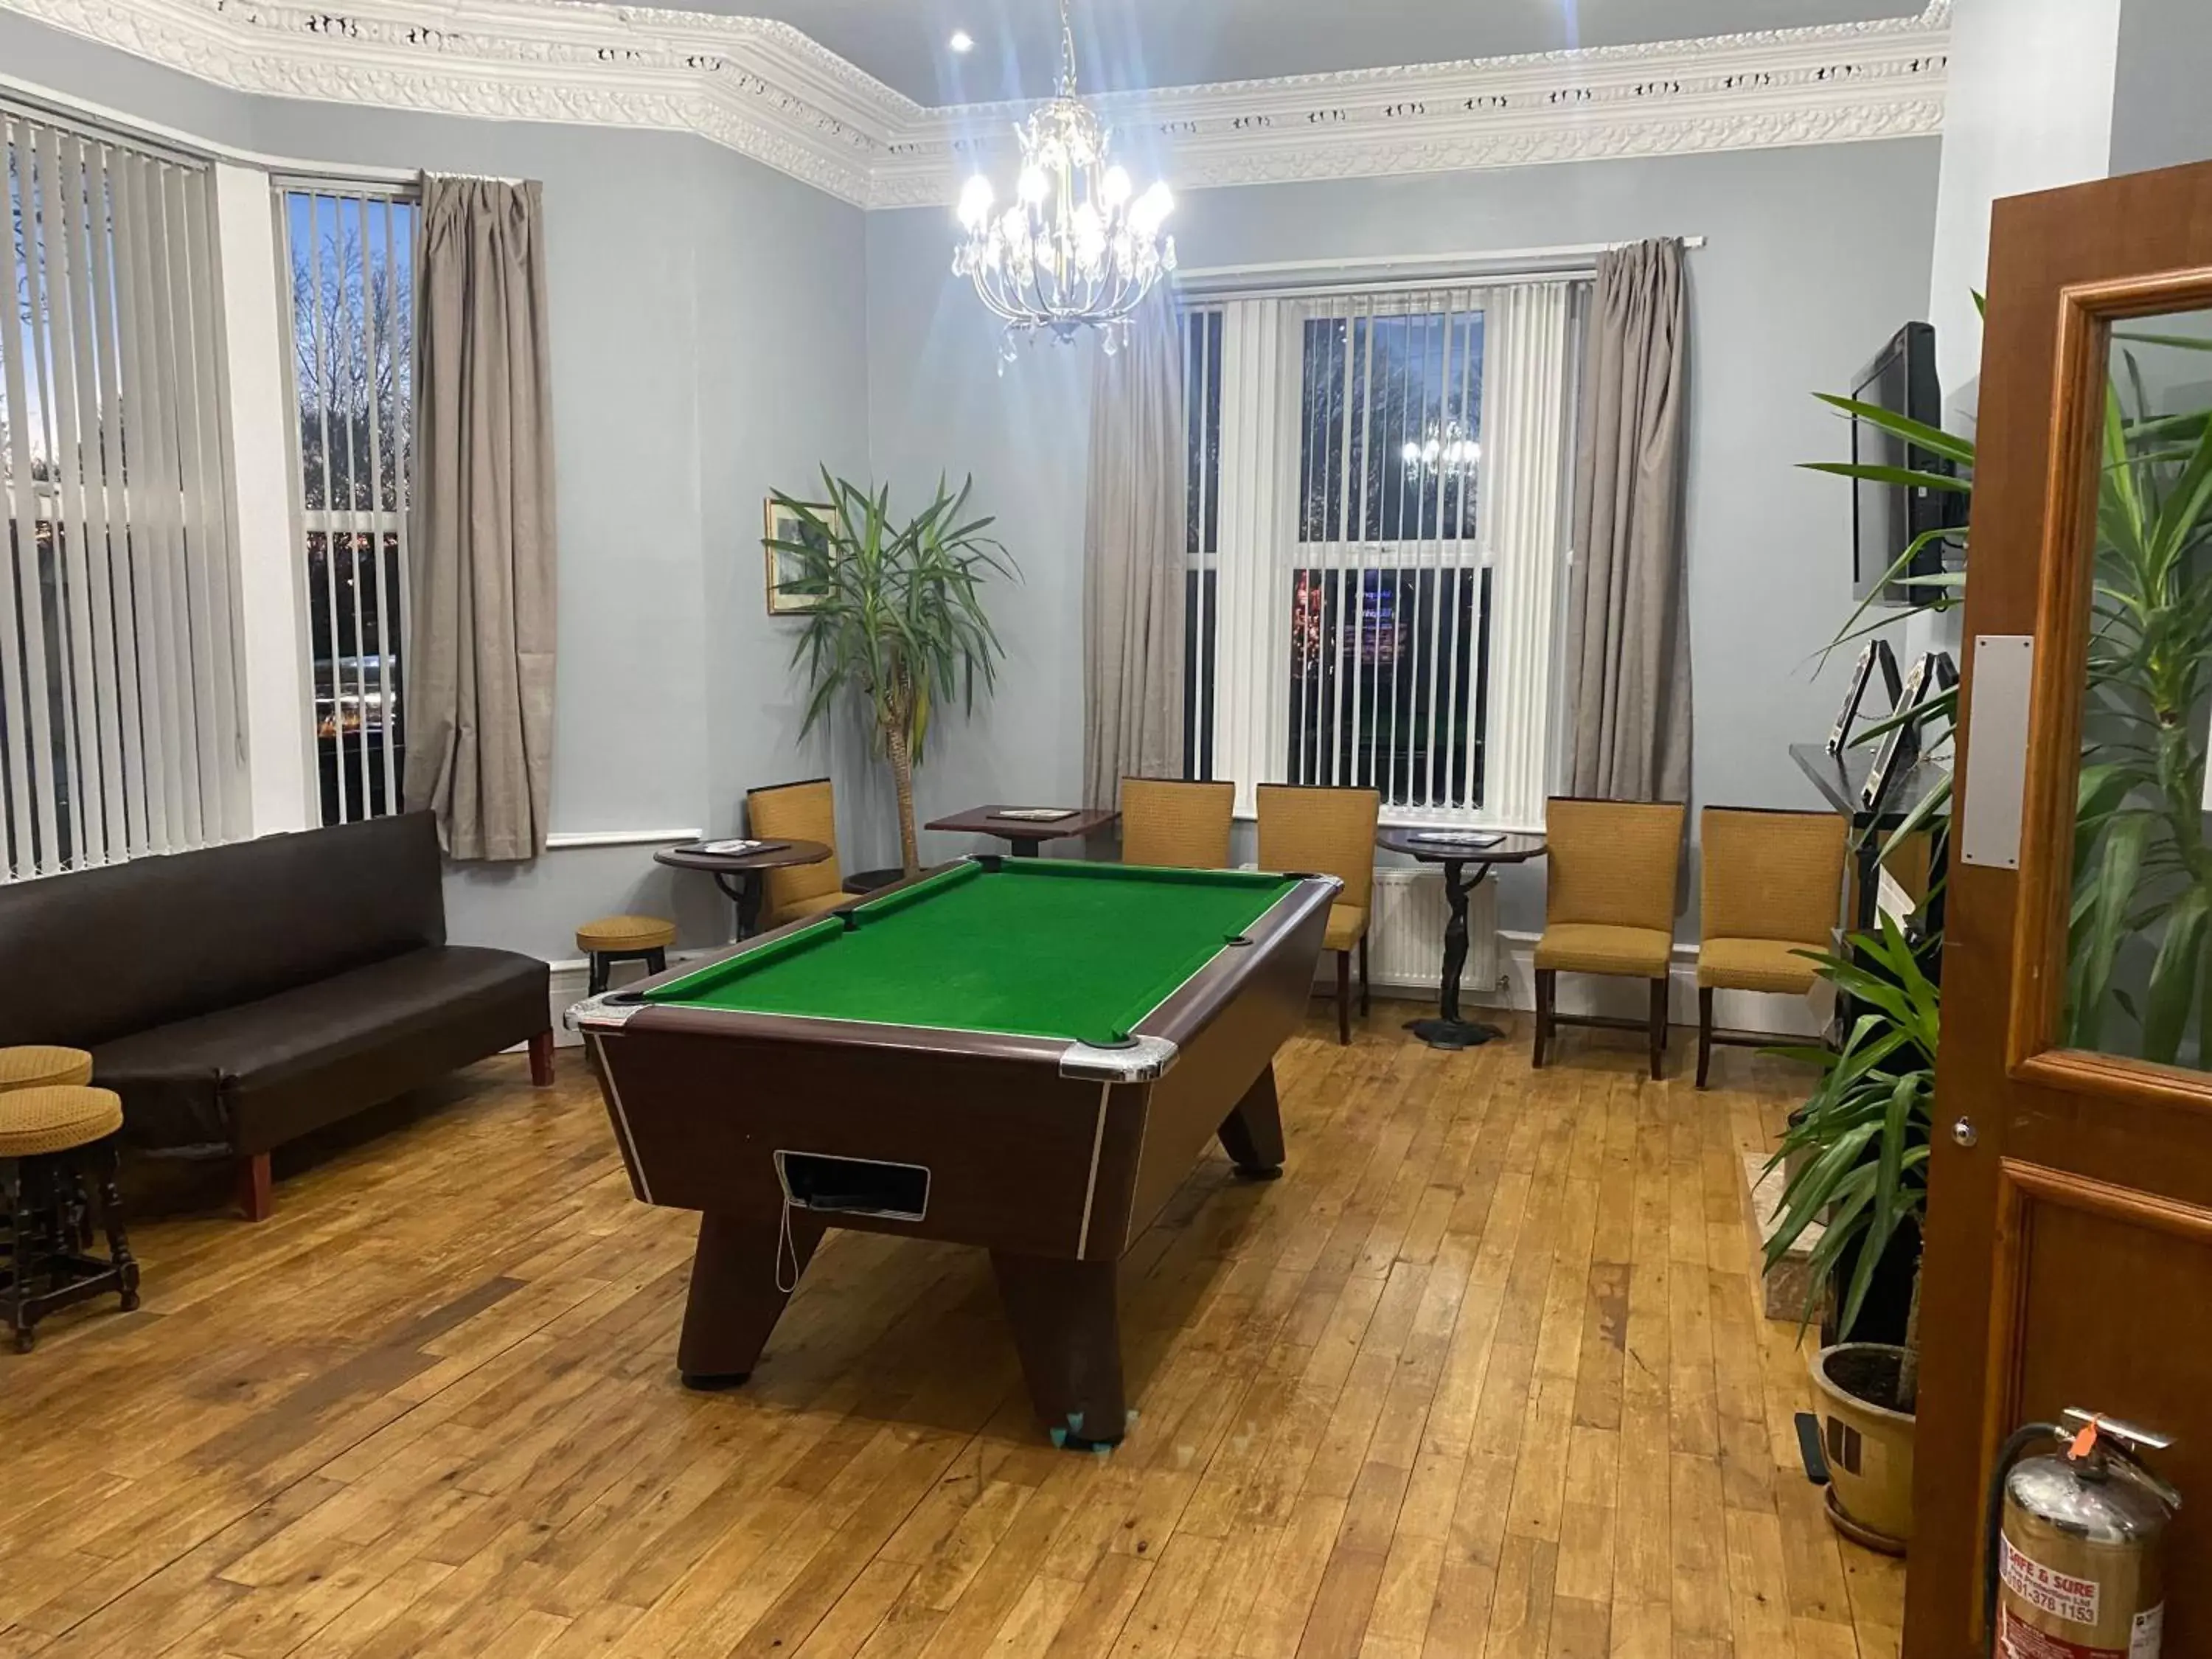 Game Room, Billiards in Clifton Hotel & Bar Newcastle